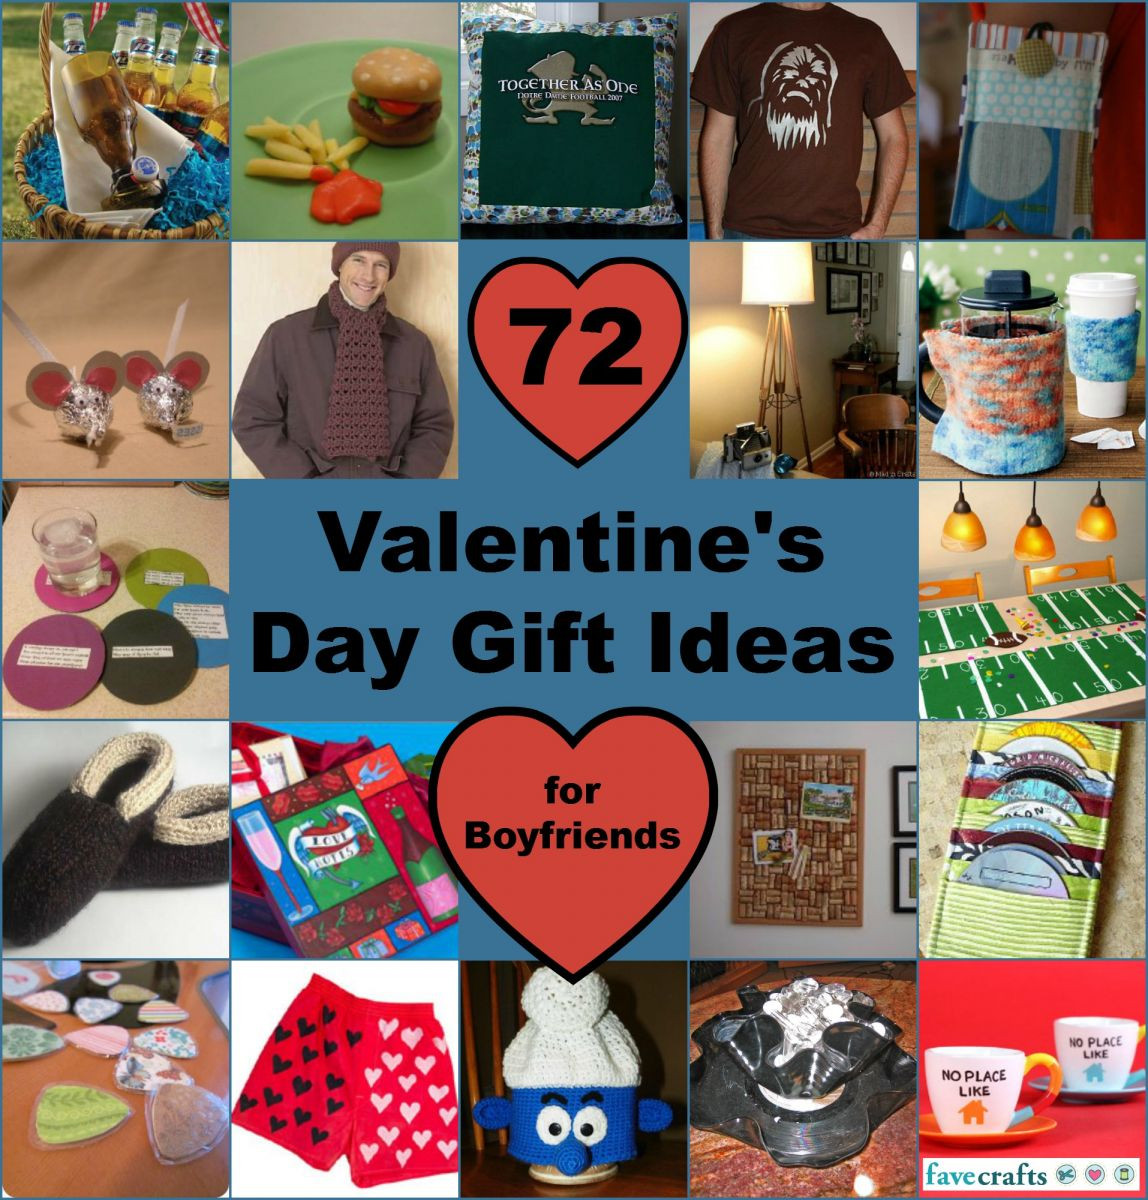 Gift Ideas For Your Boyfriend
 Top 15 Favorite Valentine s Arts and Crafts Videos and